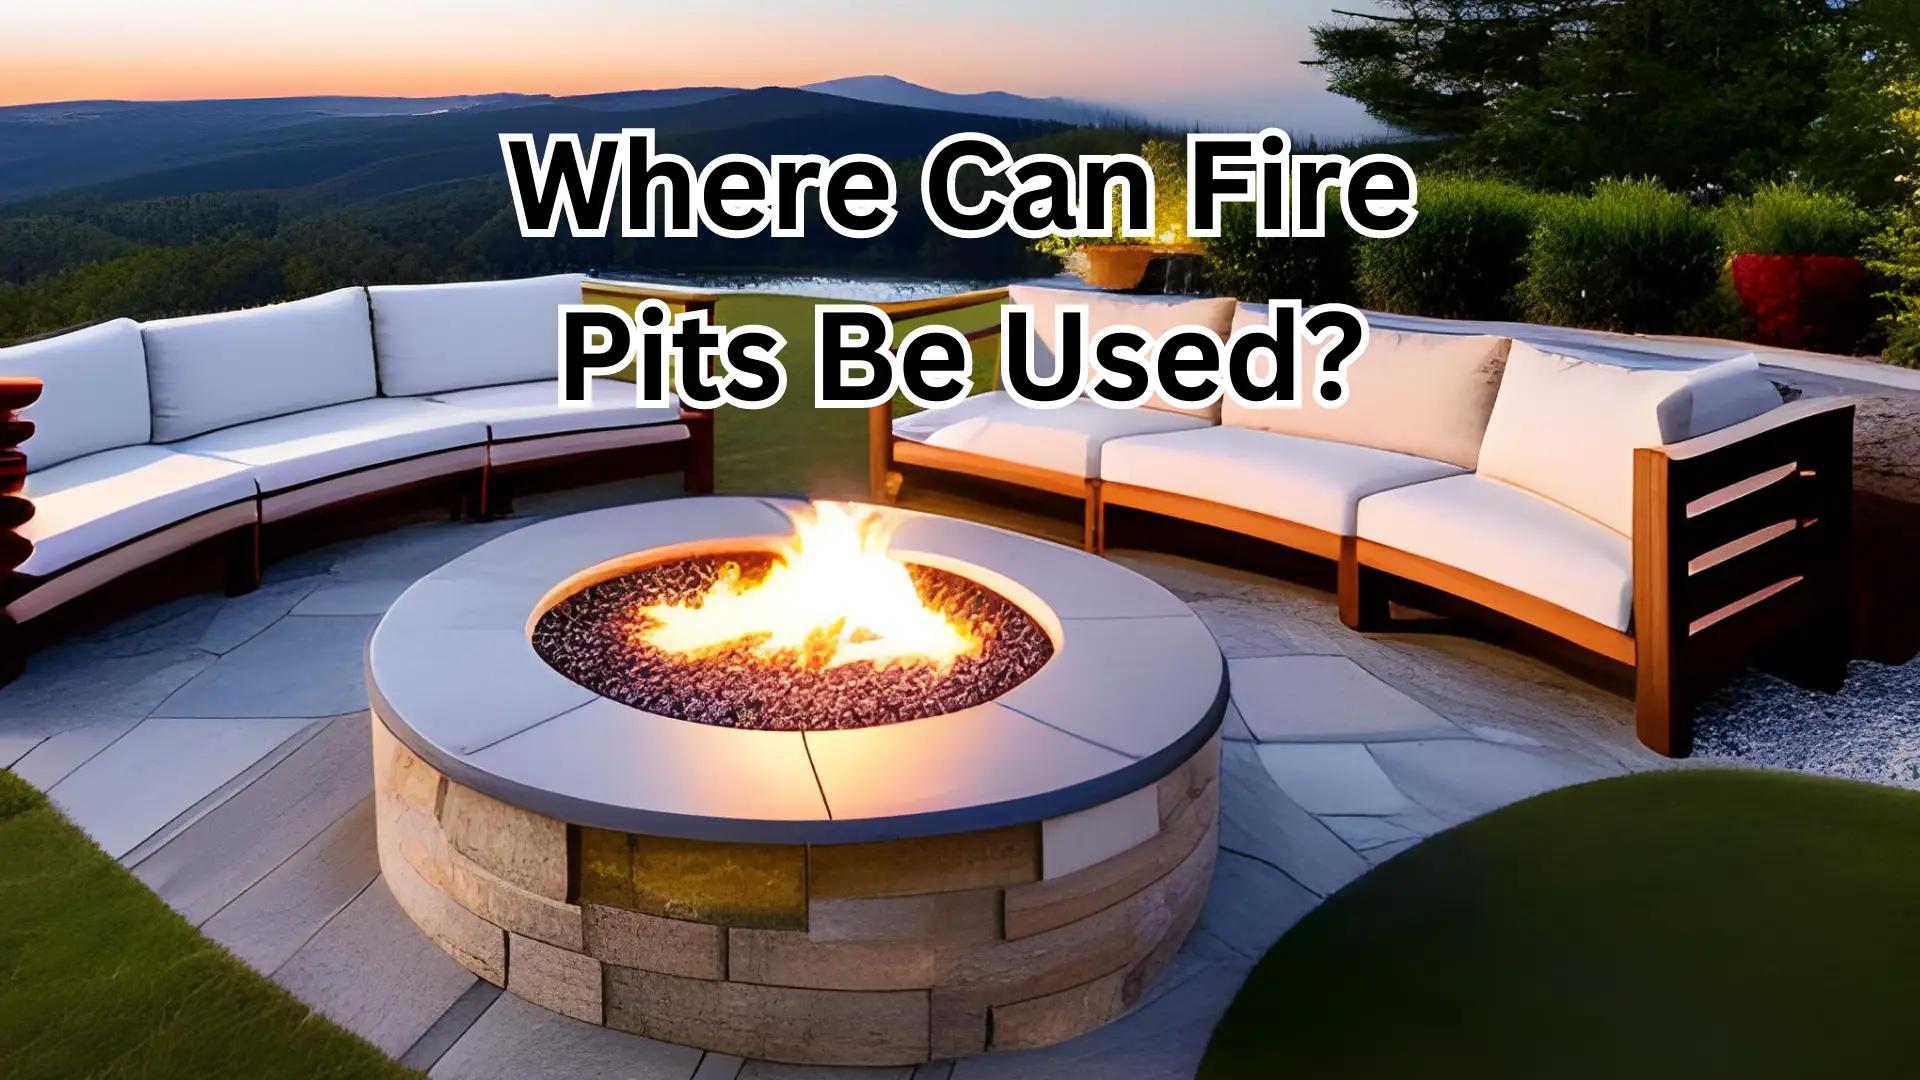 Where can fire pits be used?